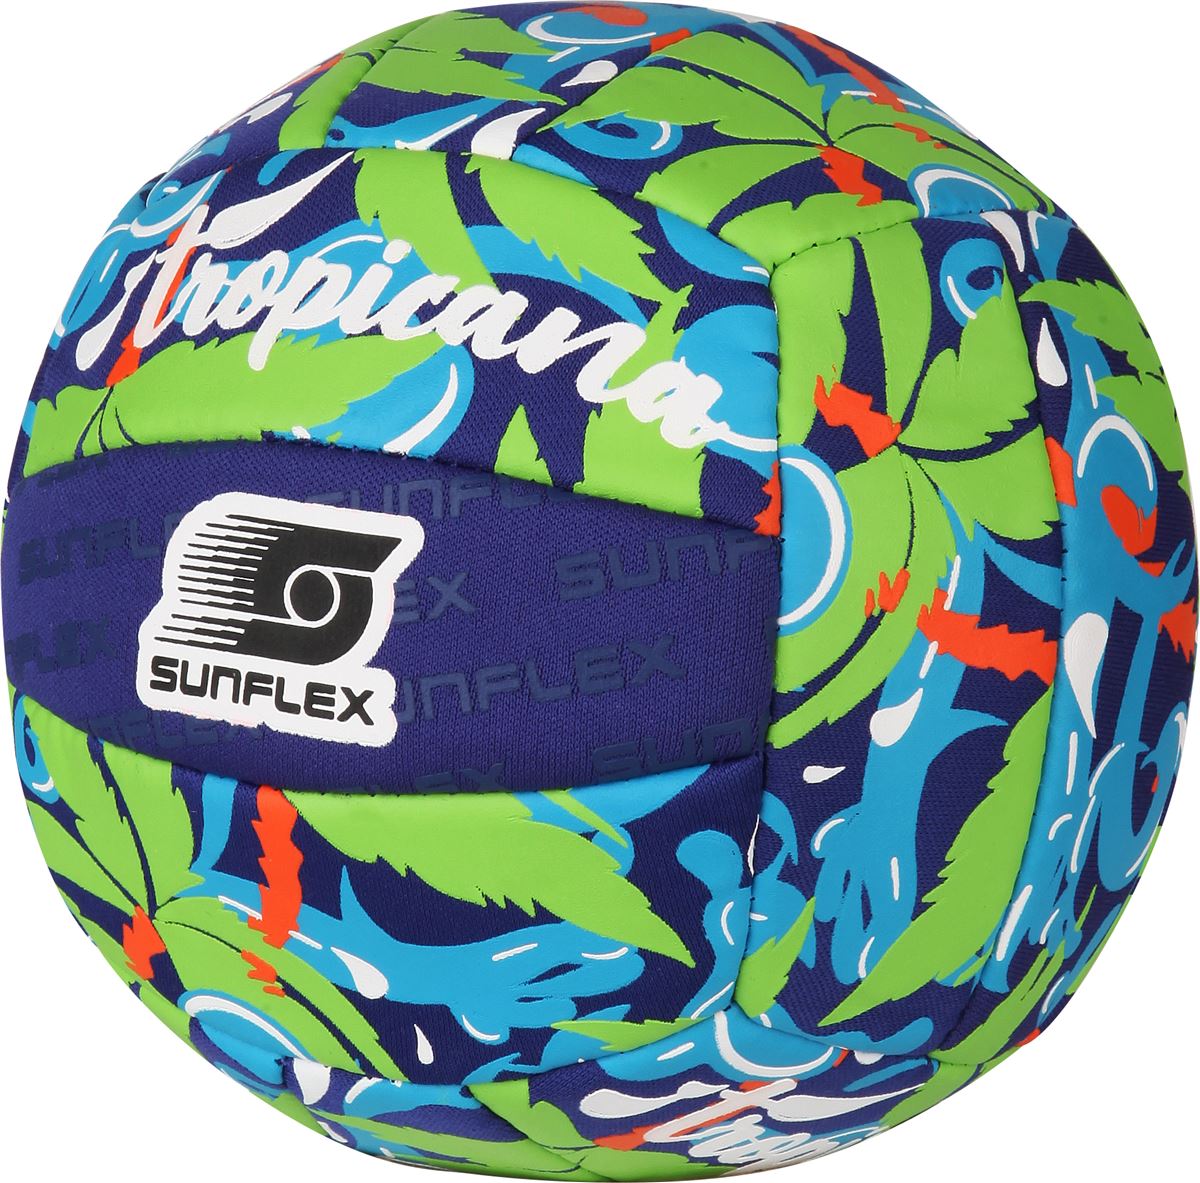 Sunflex Splash Neoprene Beach Ball Set with Two Bats and Two Balls in Blue Soft and Light Extremely Robust and Waterproof 